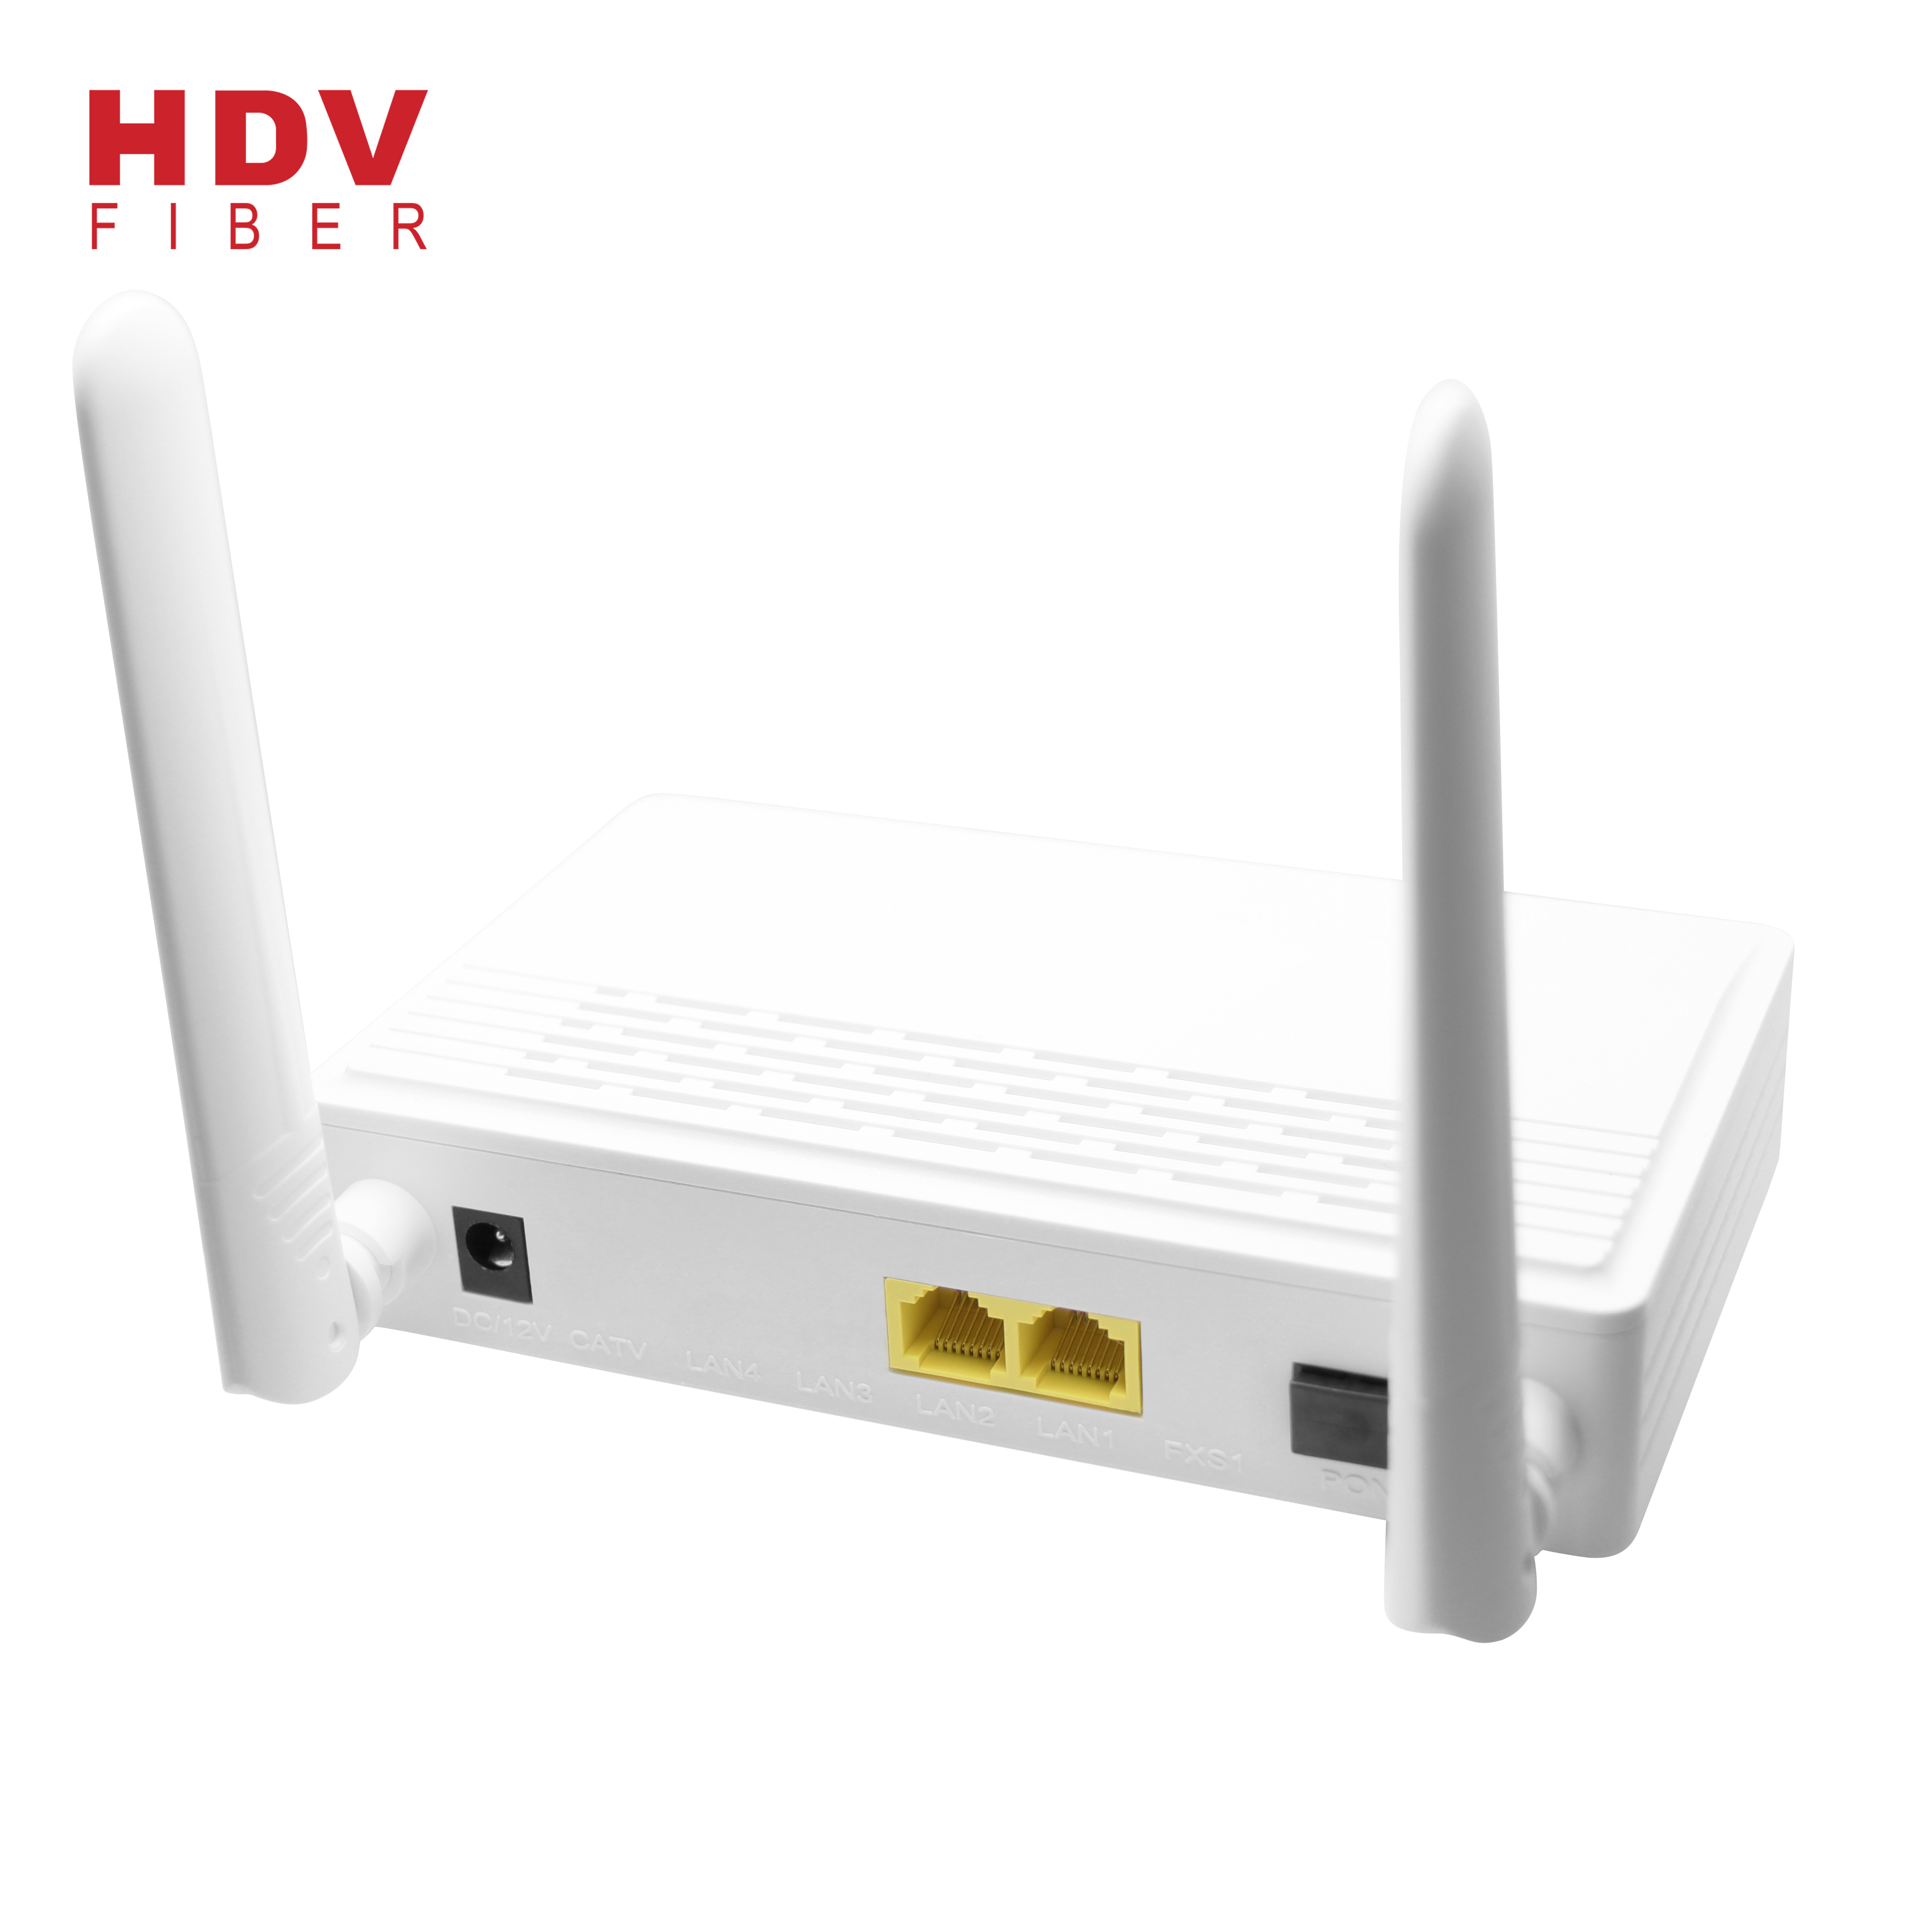 Hot New Products Cisco Transceiver - FTTH Telecom Equipment 1GE+1FE+ WIFI zte Huawei GPON ONT ONU – HDV